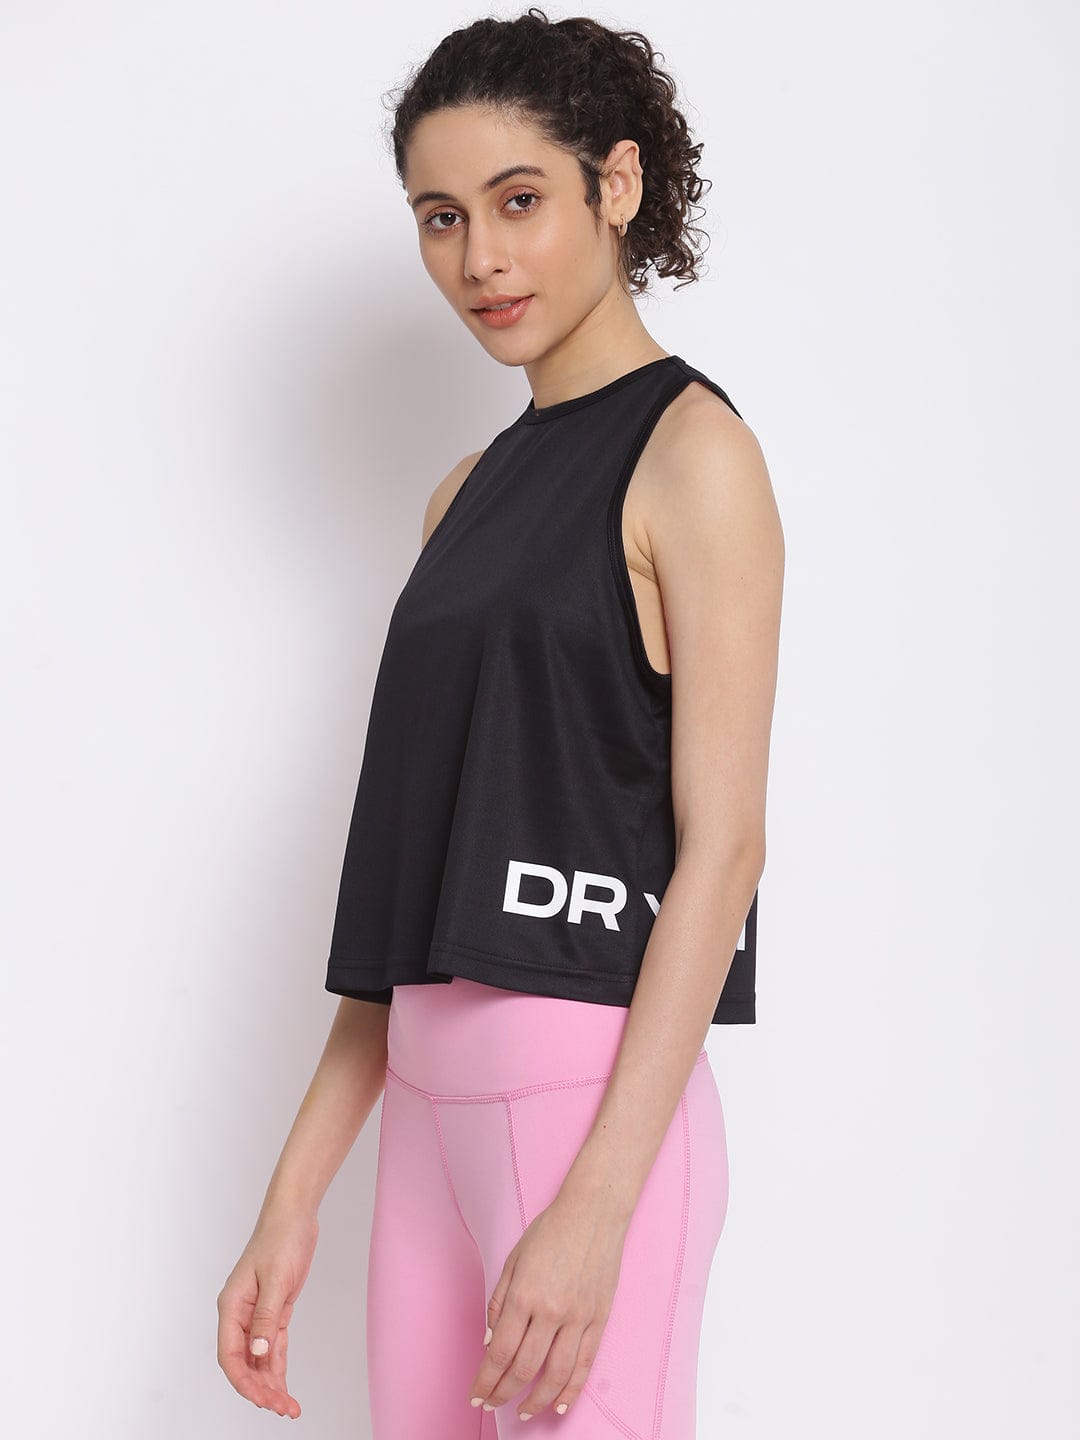 women with DRYP athleisure tank top and tights